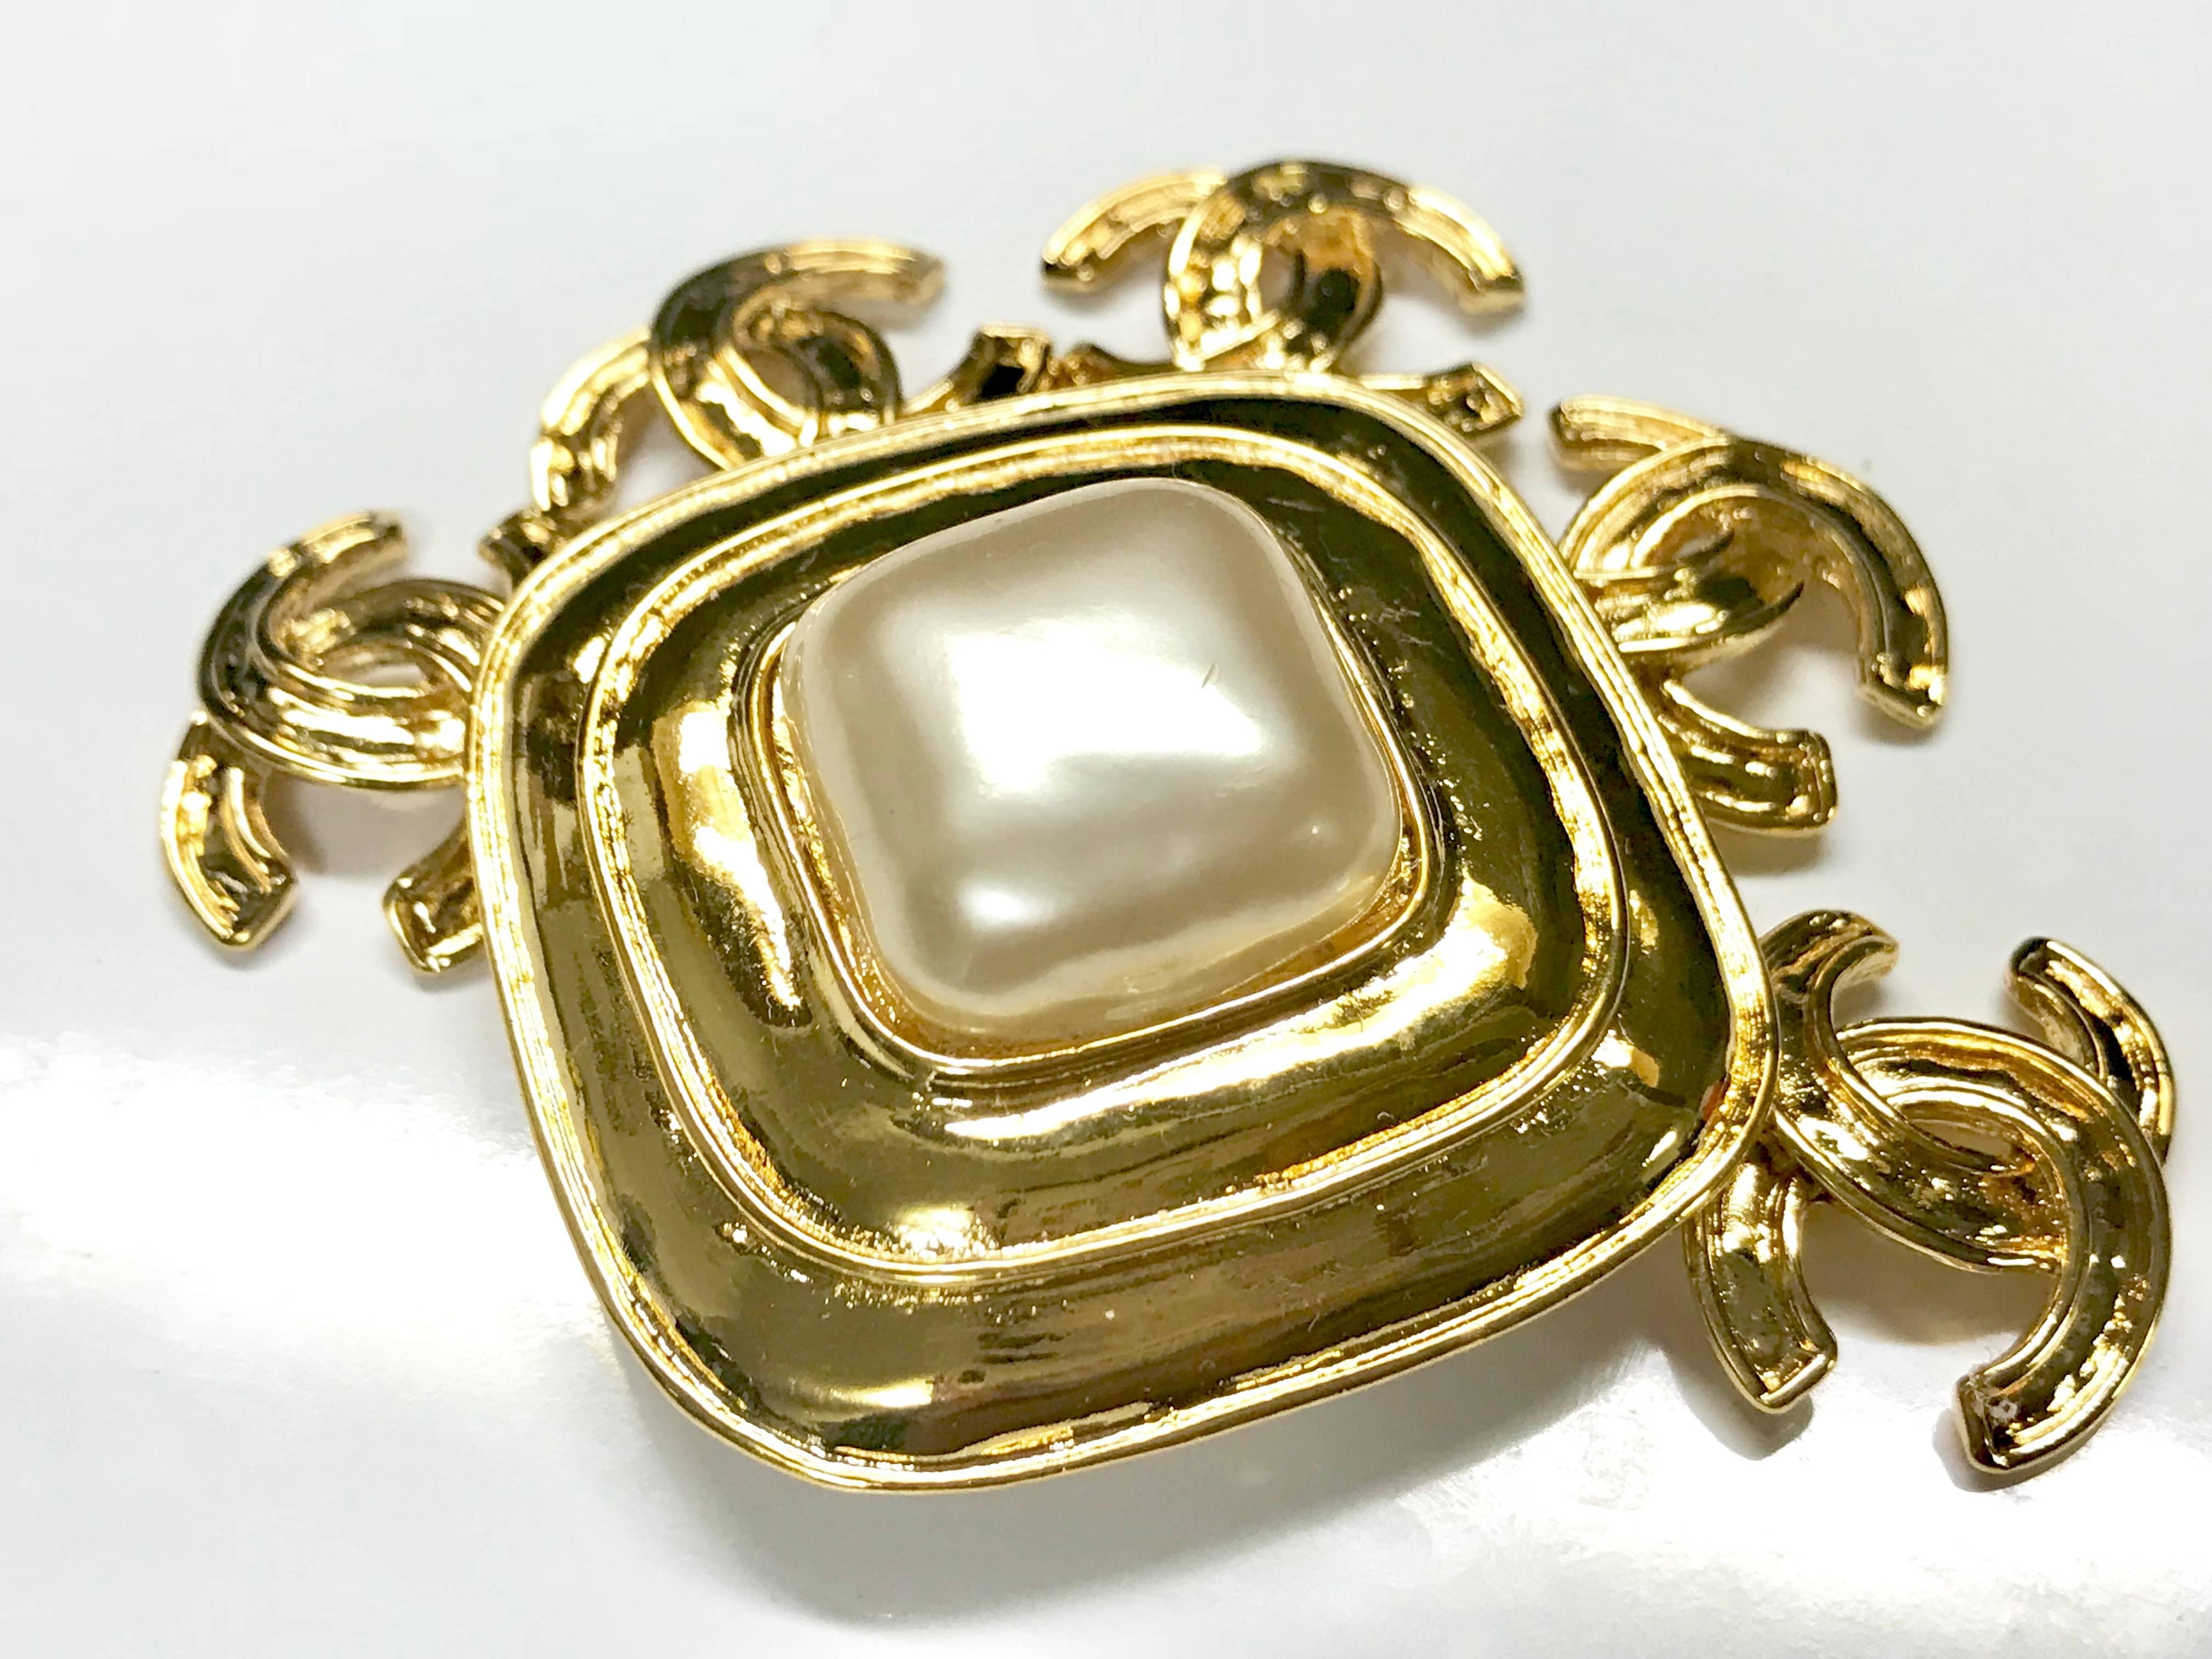 Chanel vintage 1990's gold brooch with 5 mini dangling cc charms & center square
faux pearl.

Fun, chic & wearable on a jacket or hat .

There are a few minor scuffs on the pearl. Overall in excellent vintage condition.
Oval signature plaque on the